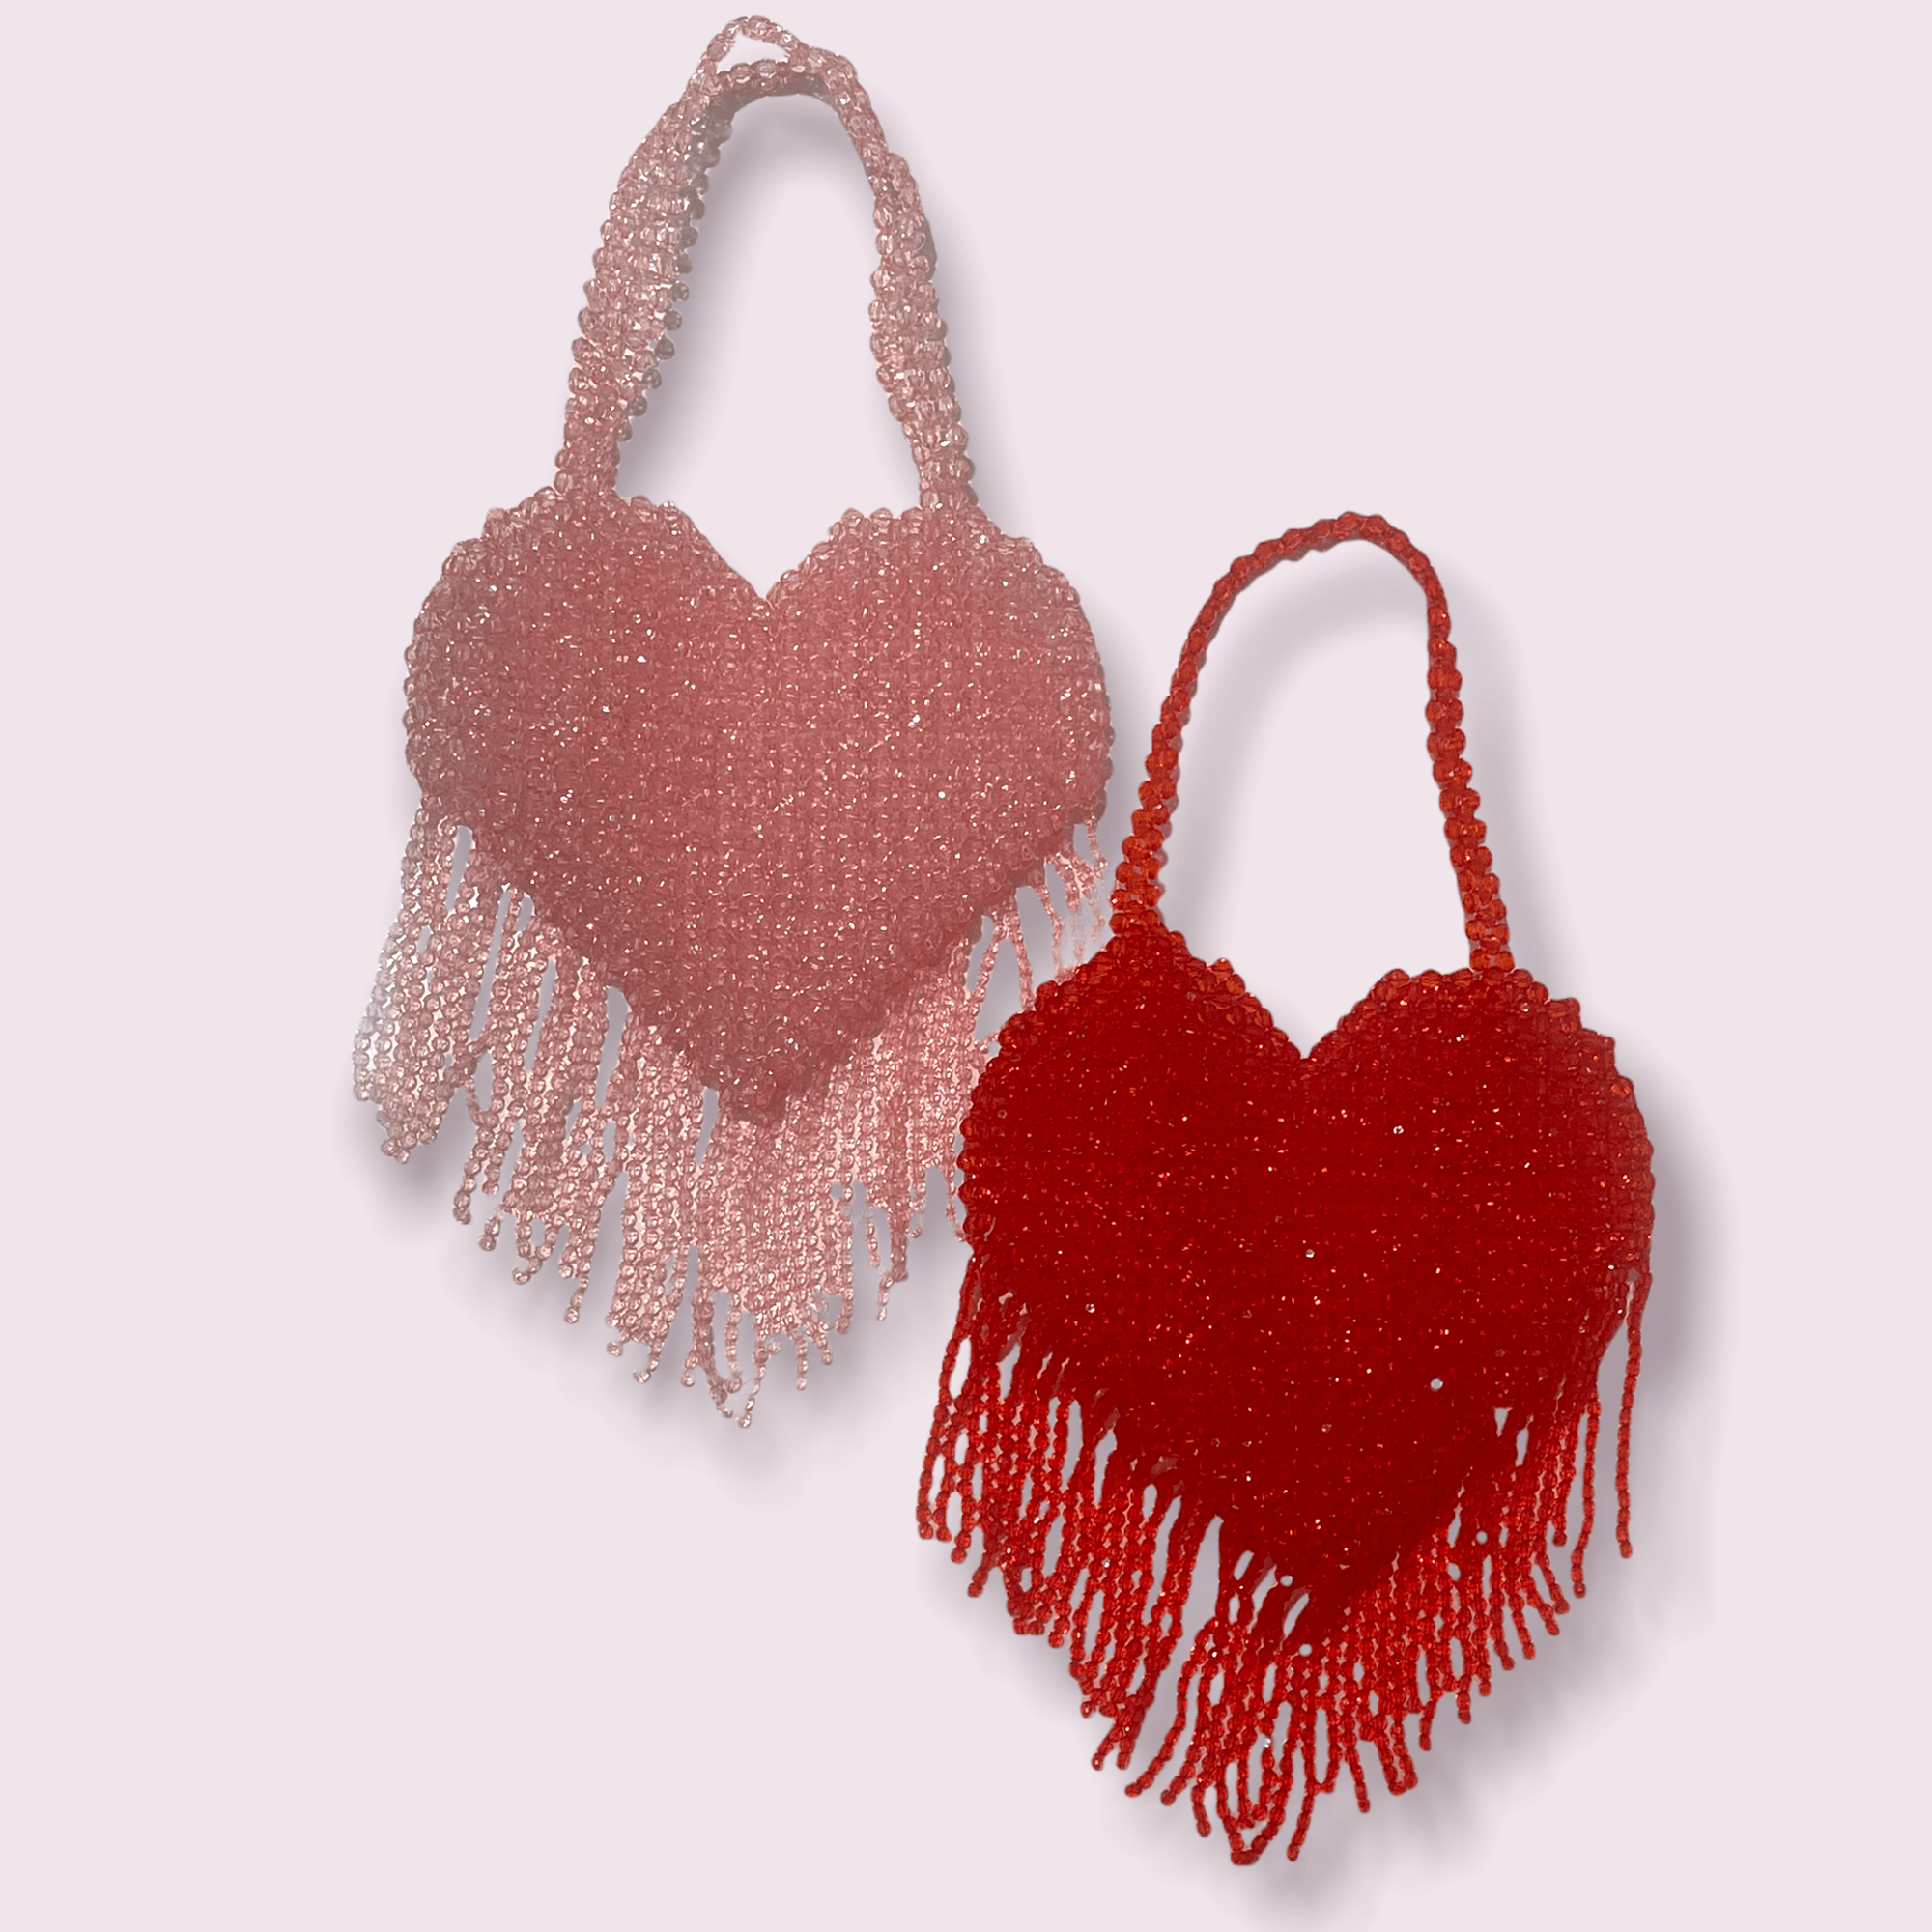 red heart purse